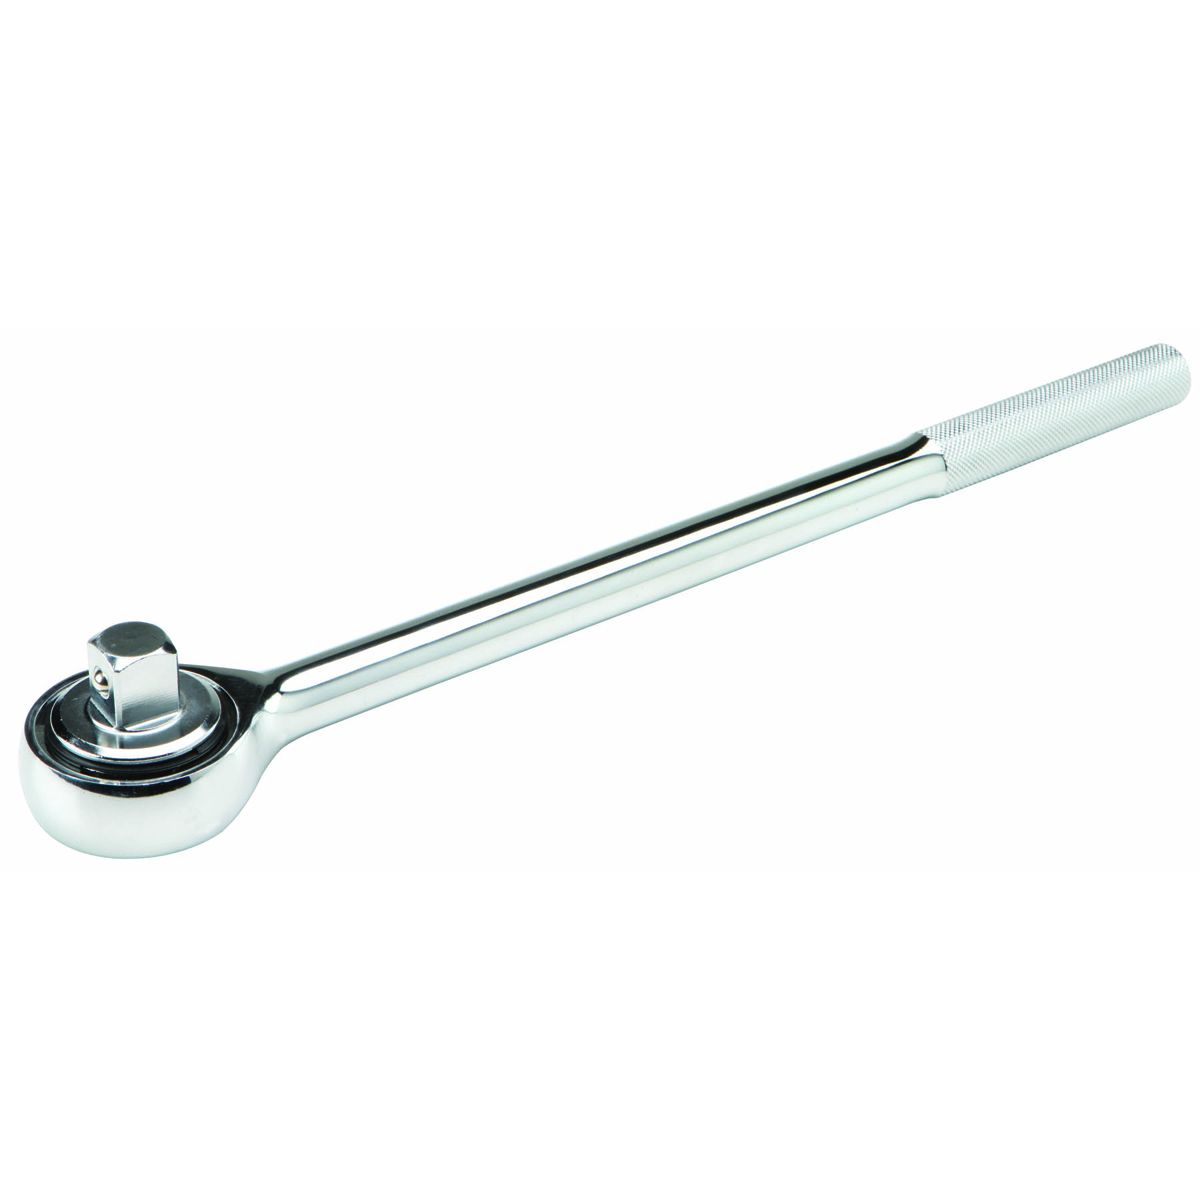 PITTSBURGH PRO 3/4 in. Drive 18 in. Ratchet